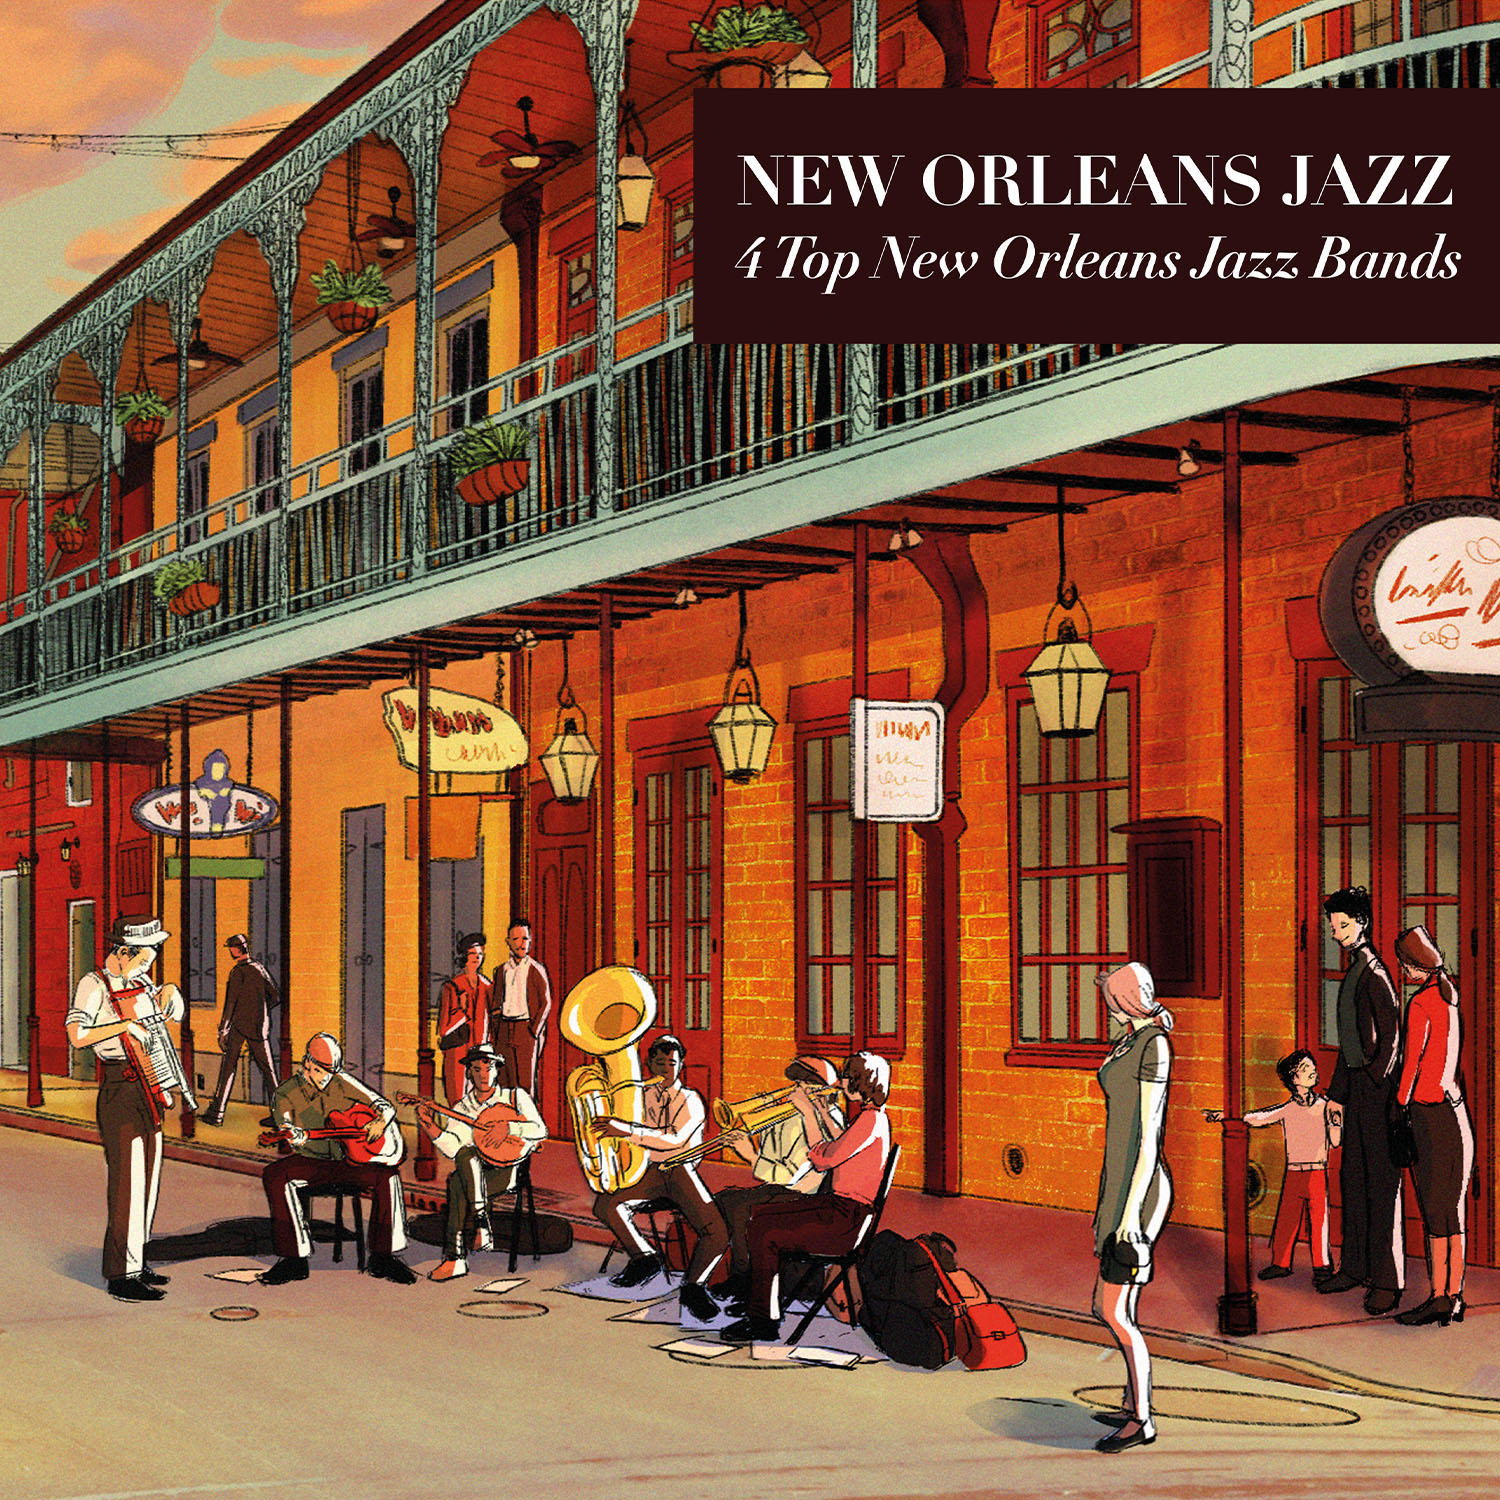 New Orleans Jazz - 4 Top New Orleans Jazz Bands